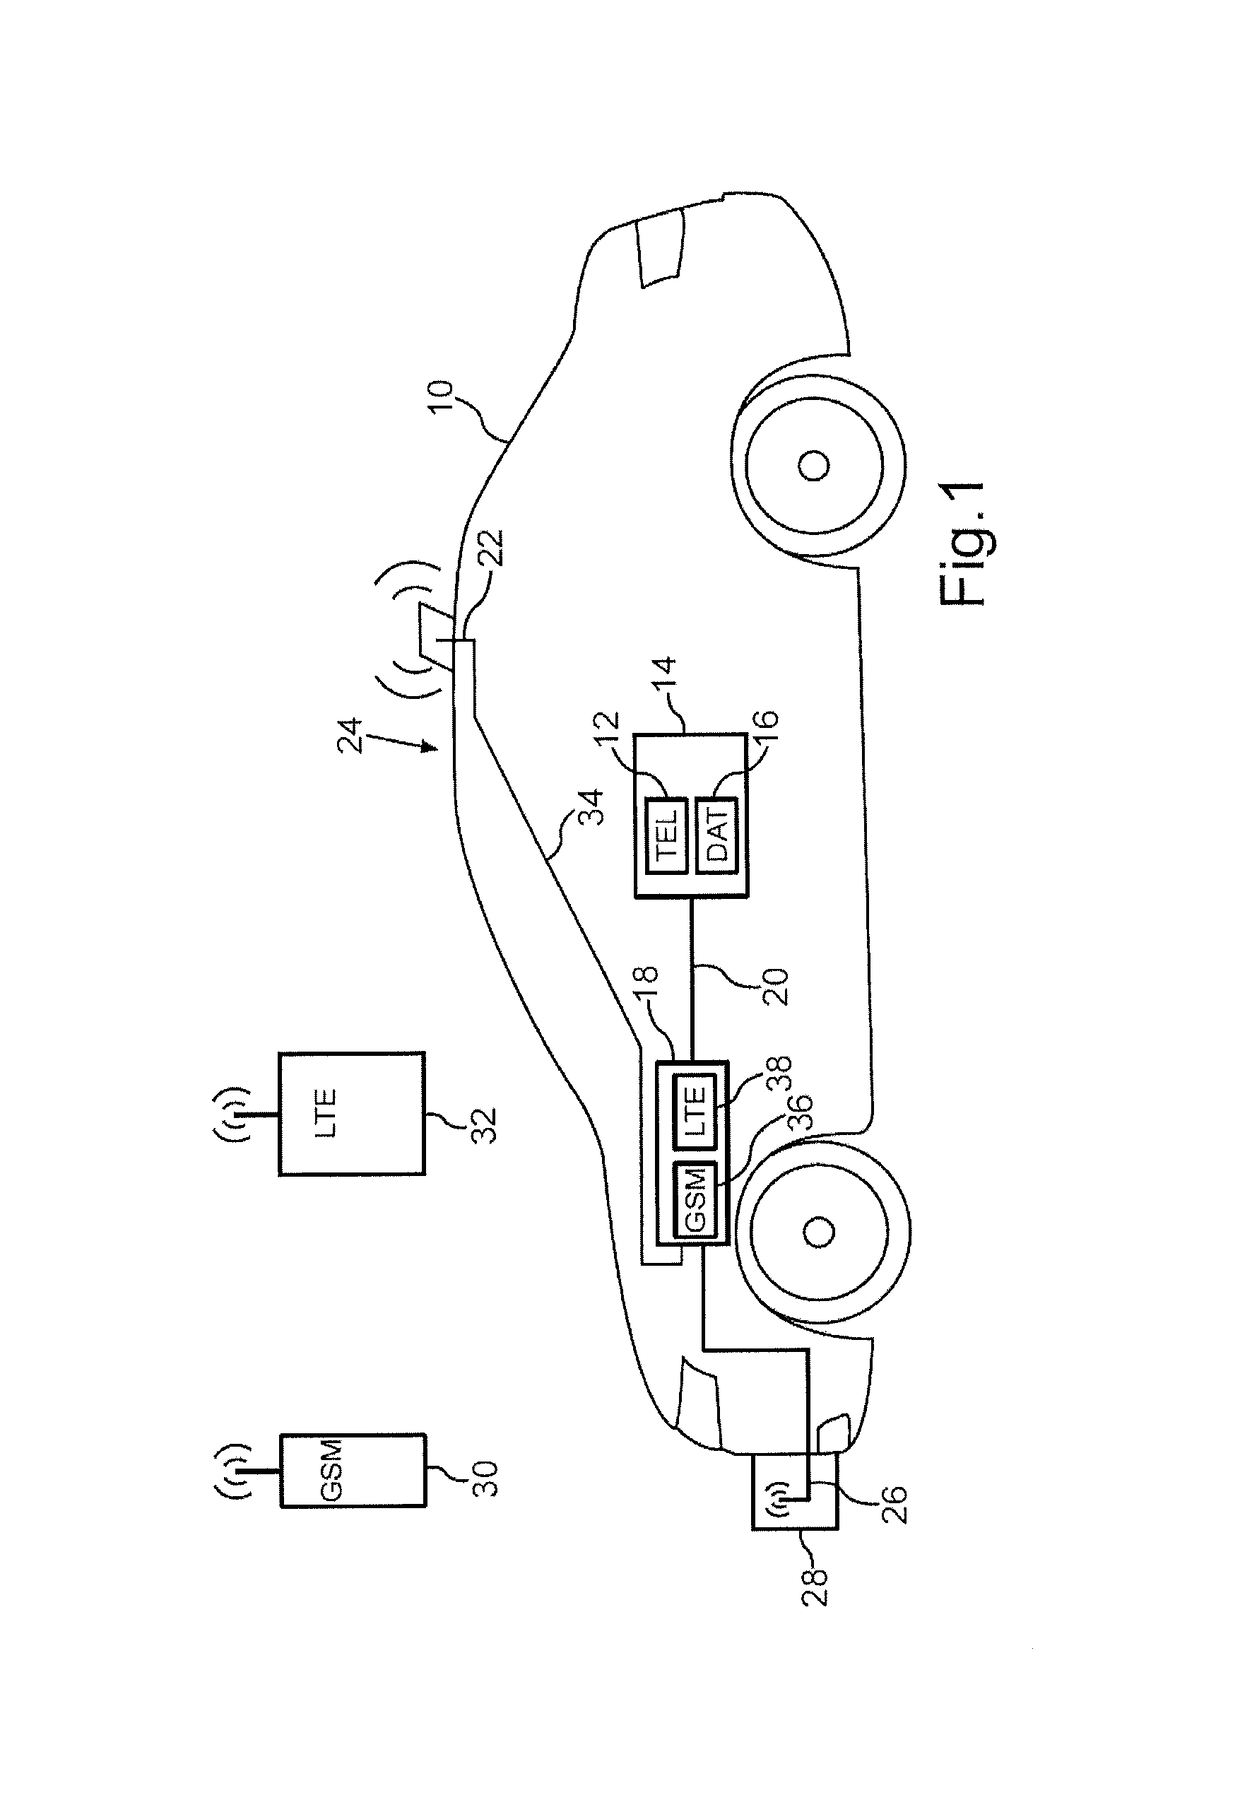 Mobile wireless device for a motor vehicle, and method for operating the mobile wireless device